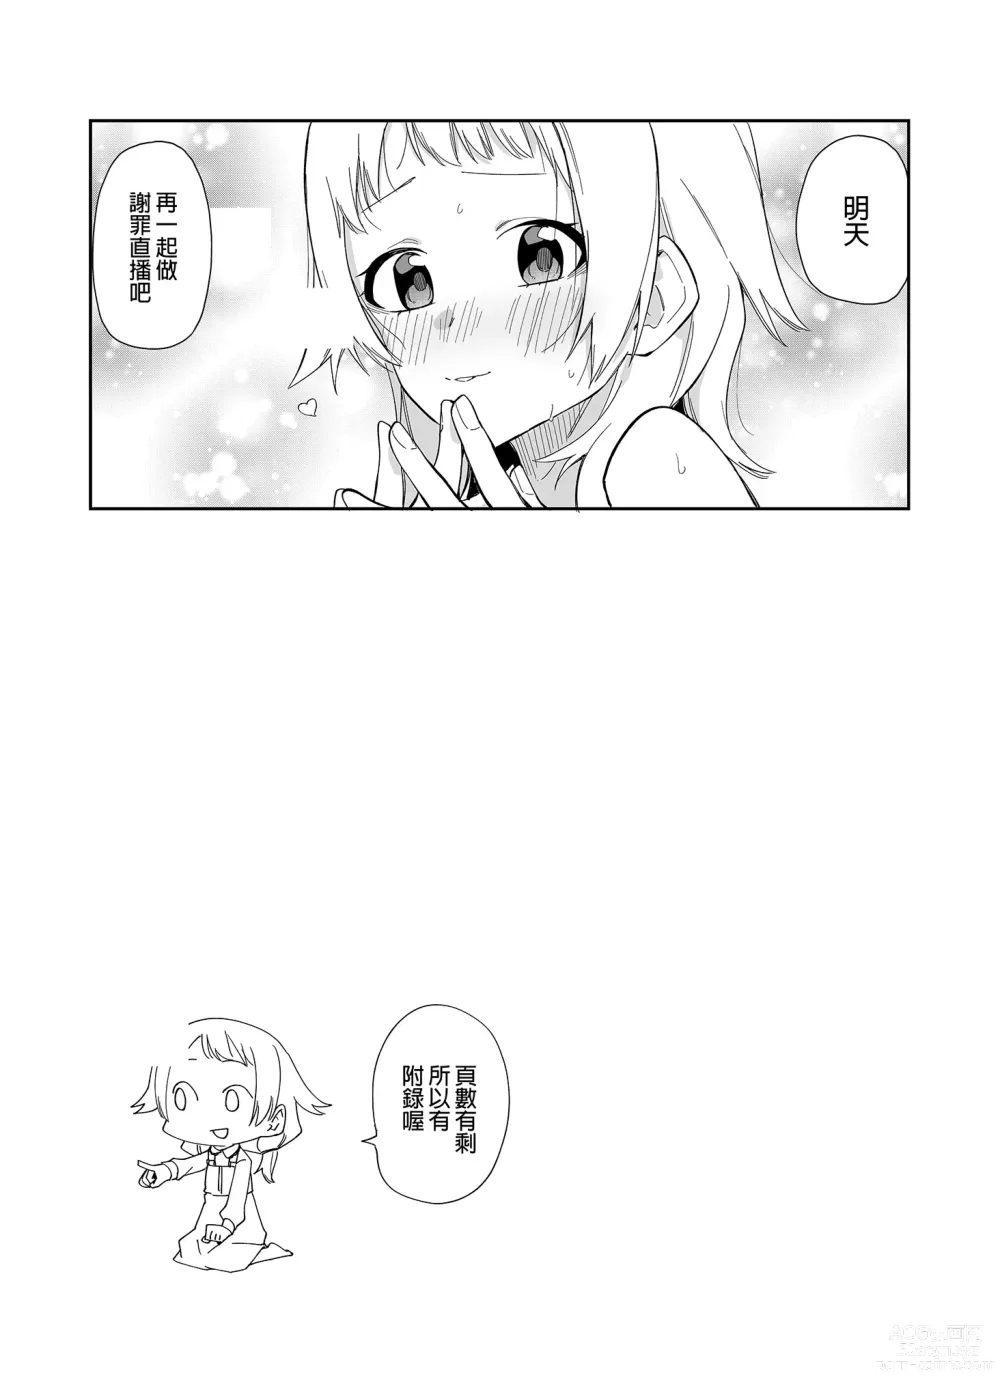 Page 30 of doujinshi 隣人は有名配信者